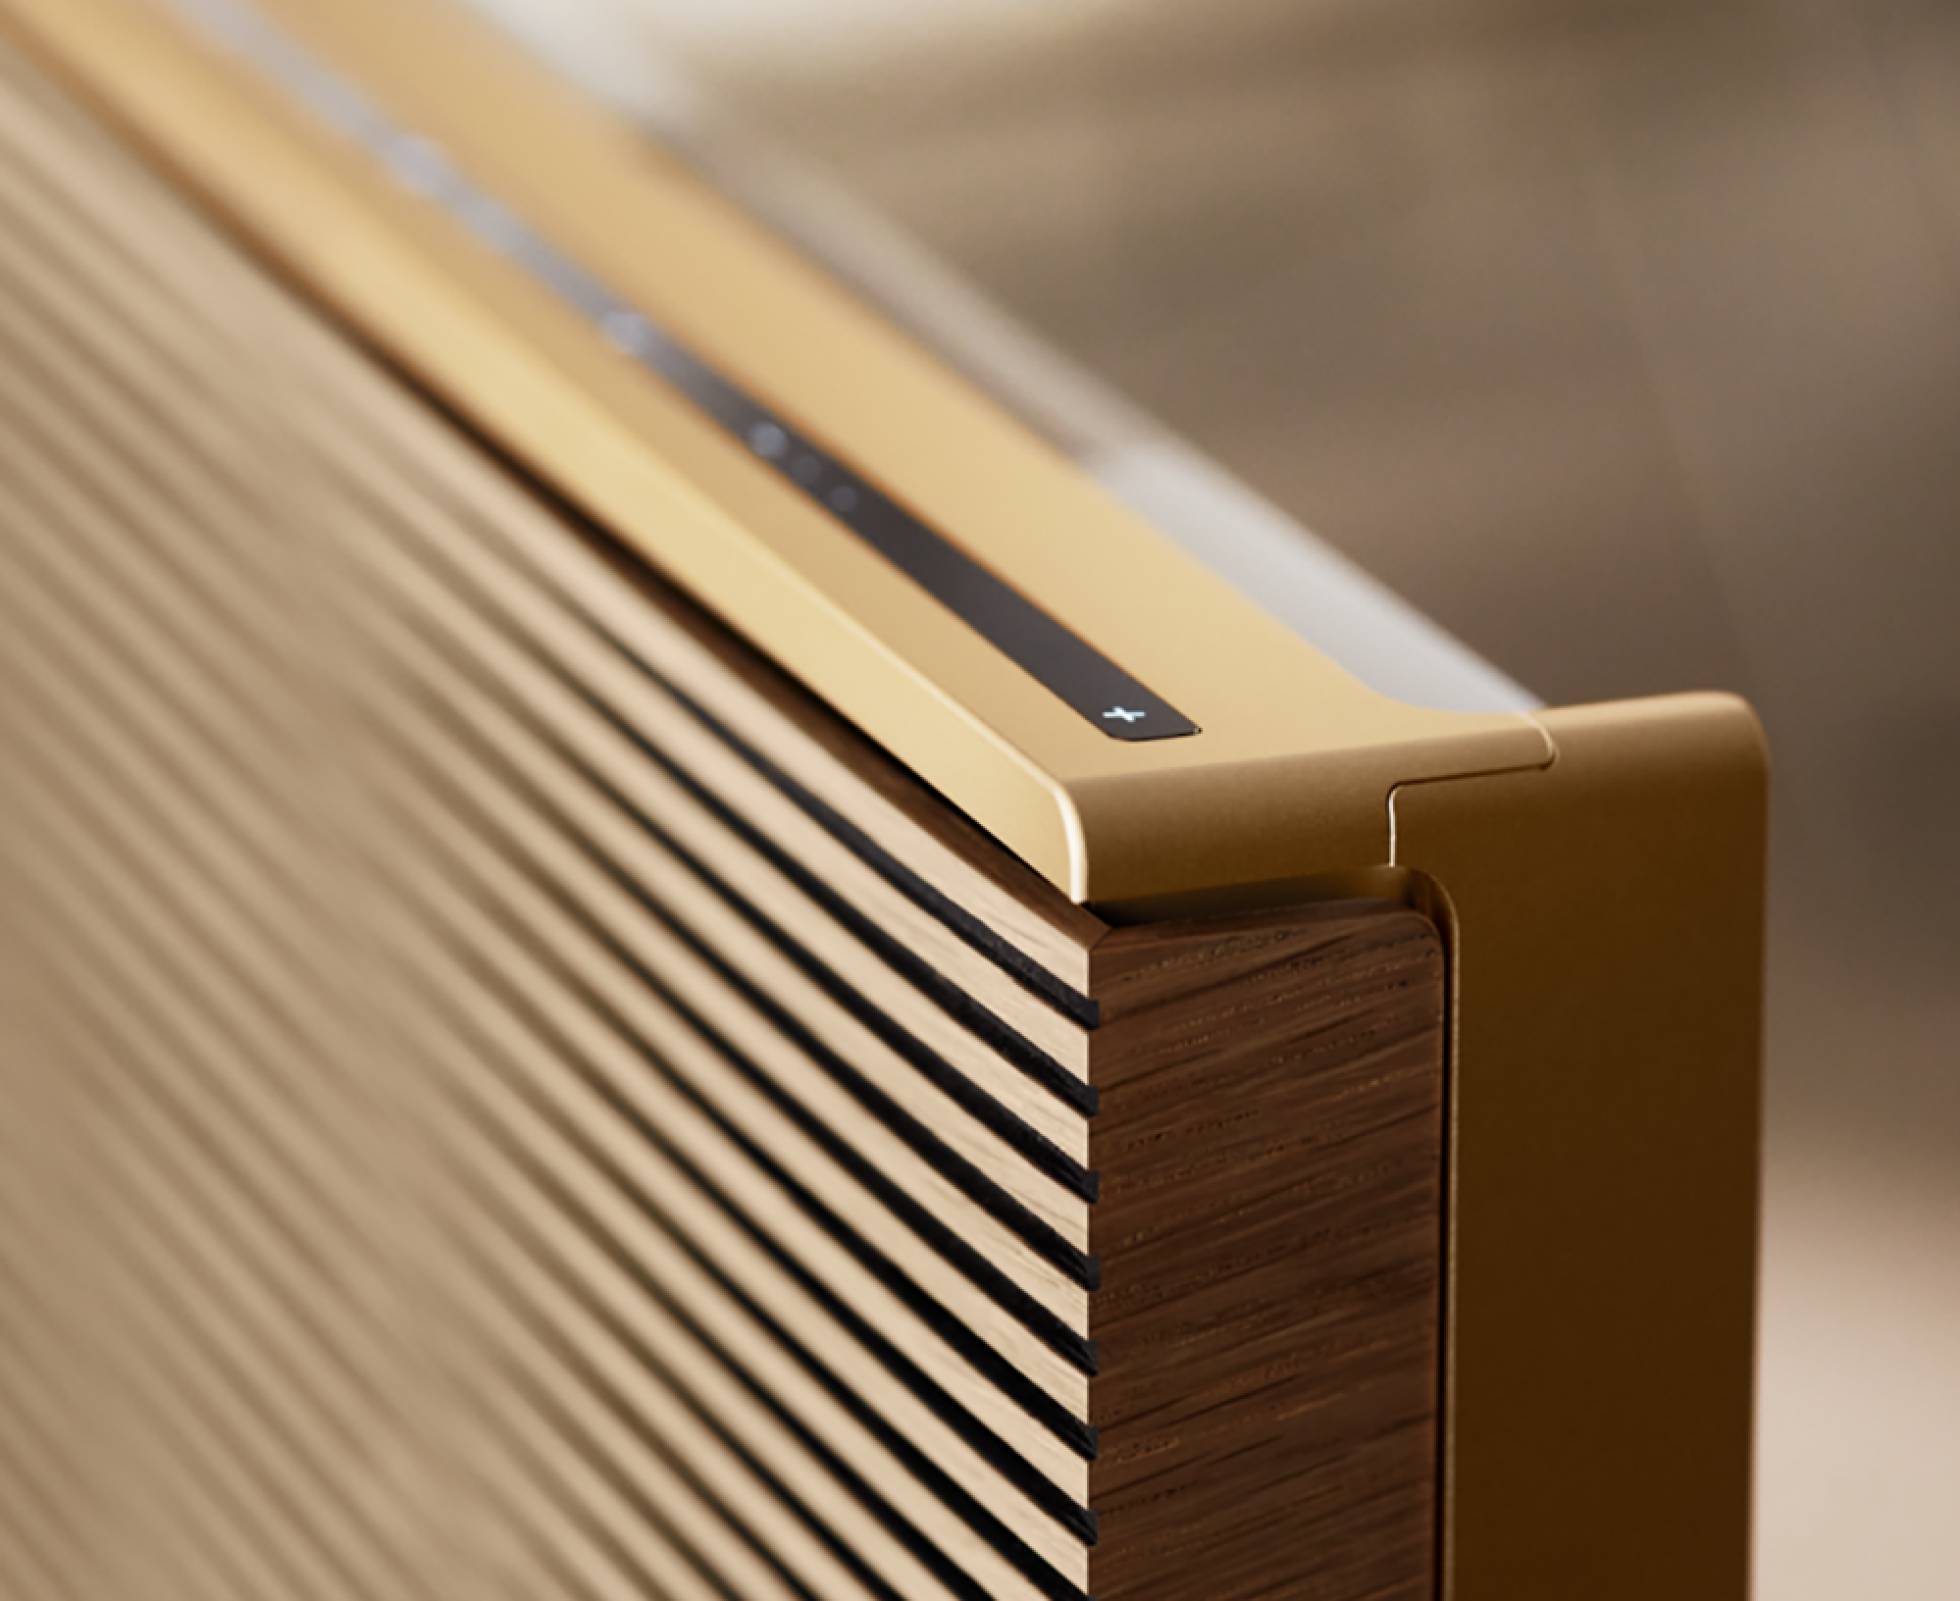 Altavoces Beosound Level de Bang and Olufsen. 